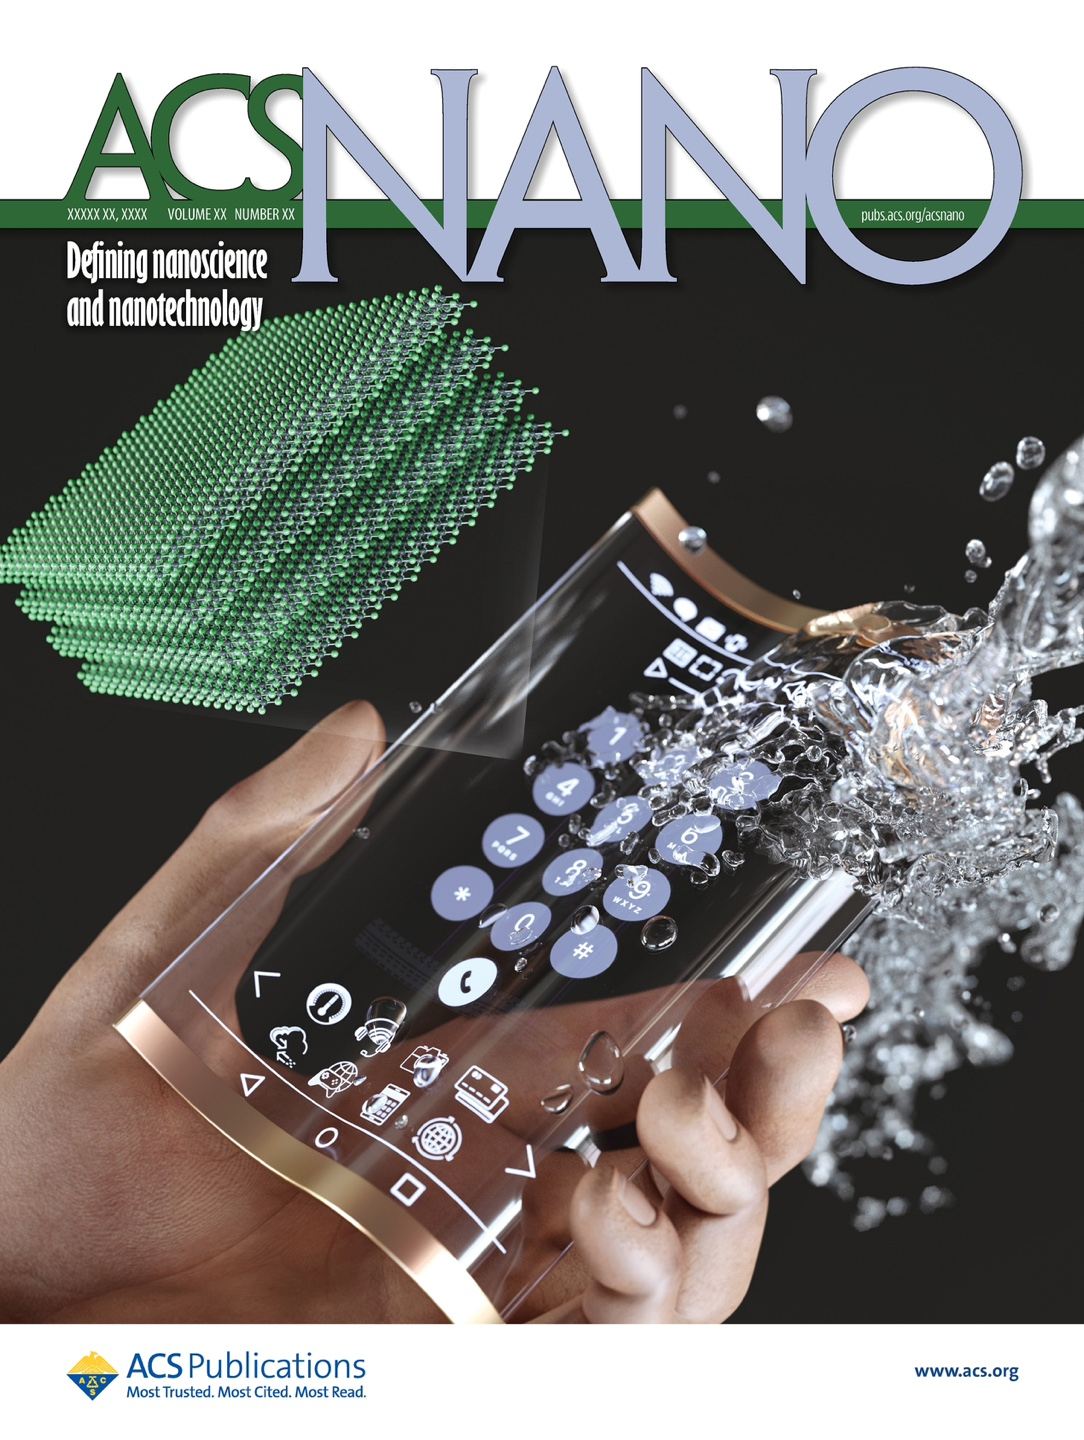 The front cover of the ACS Nano journal published on June 13 shows a concept image of an MXene-based OLED display. (KAIST)